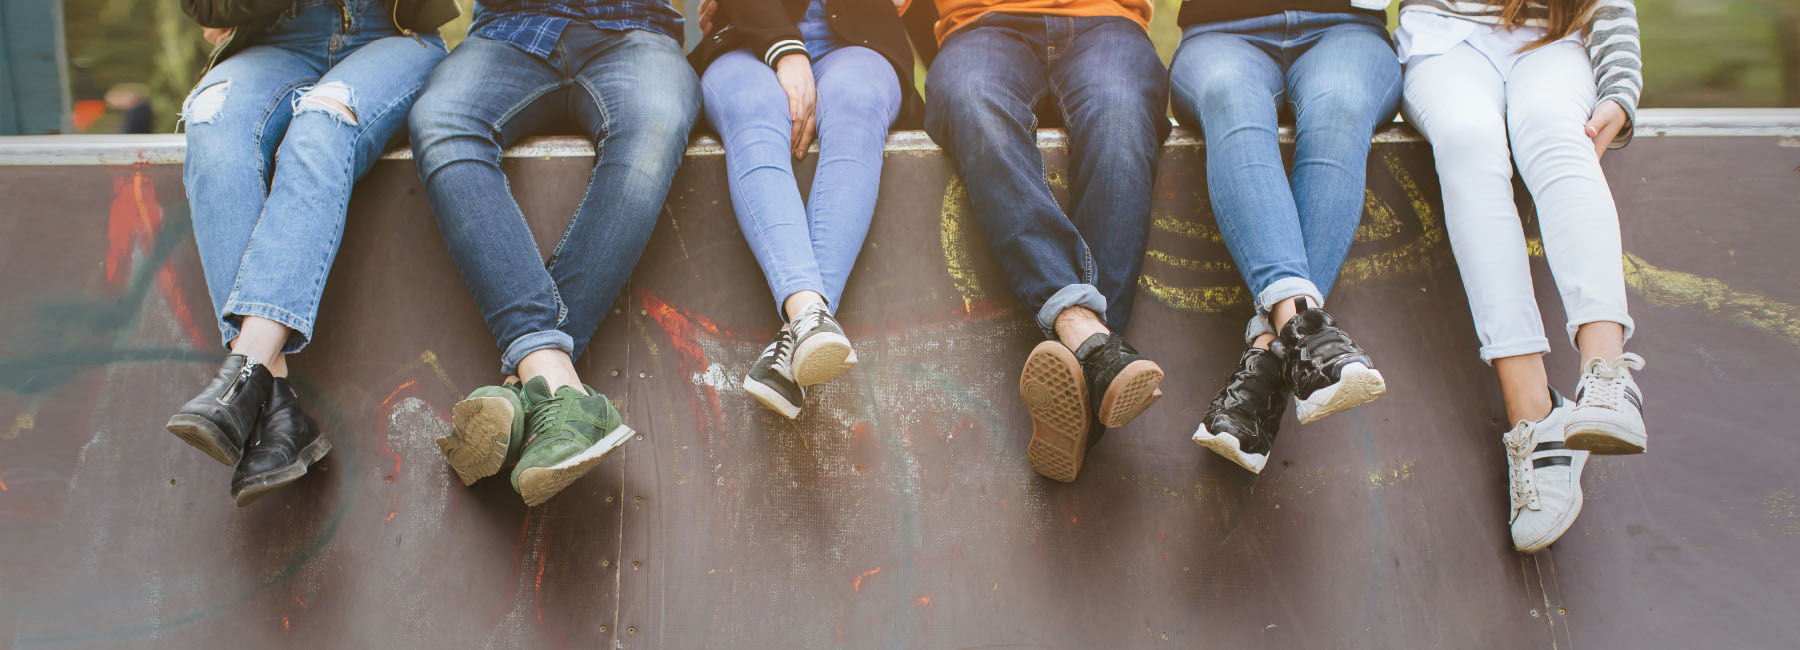 The legs of five young people sitting on a skatepark ledge